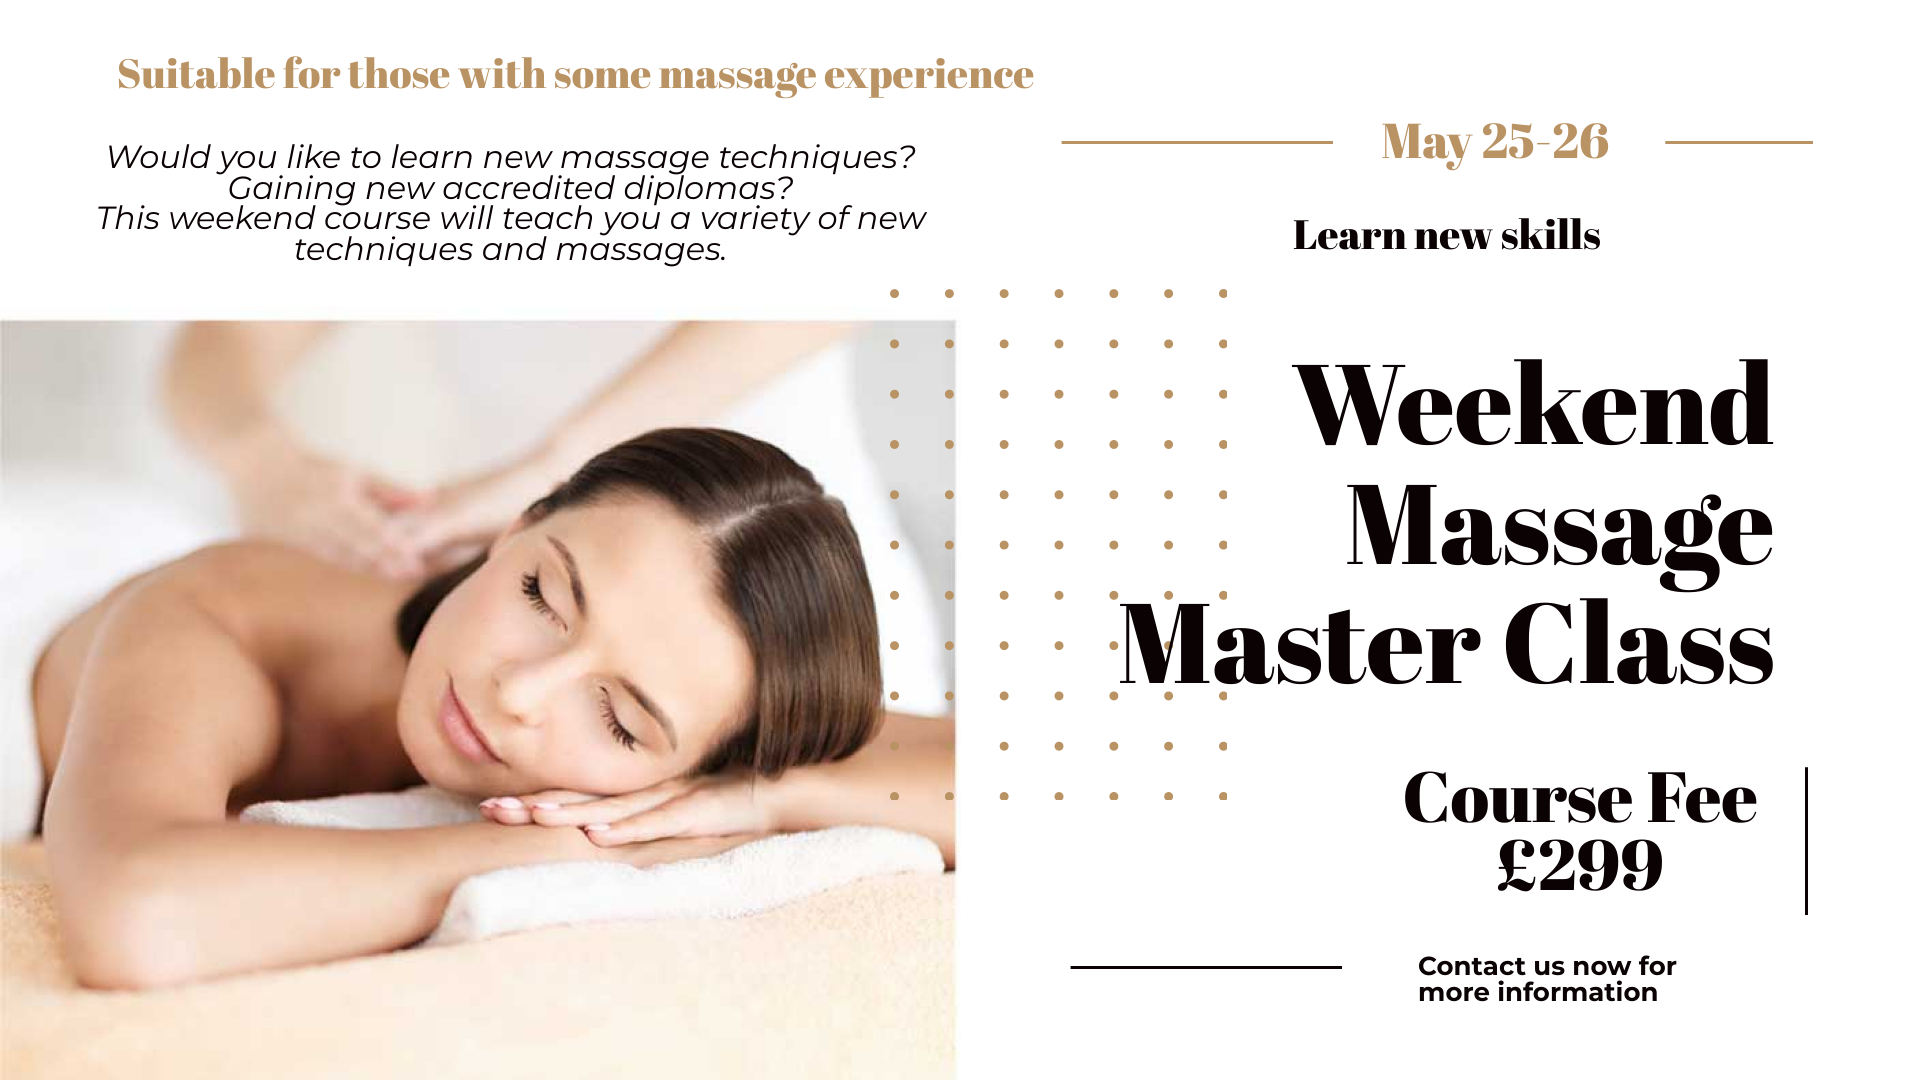 Weekend massage beginner masterclass course in Essex at Hair and Beauty Academy Courses